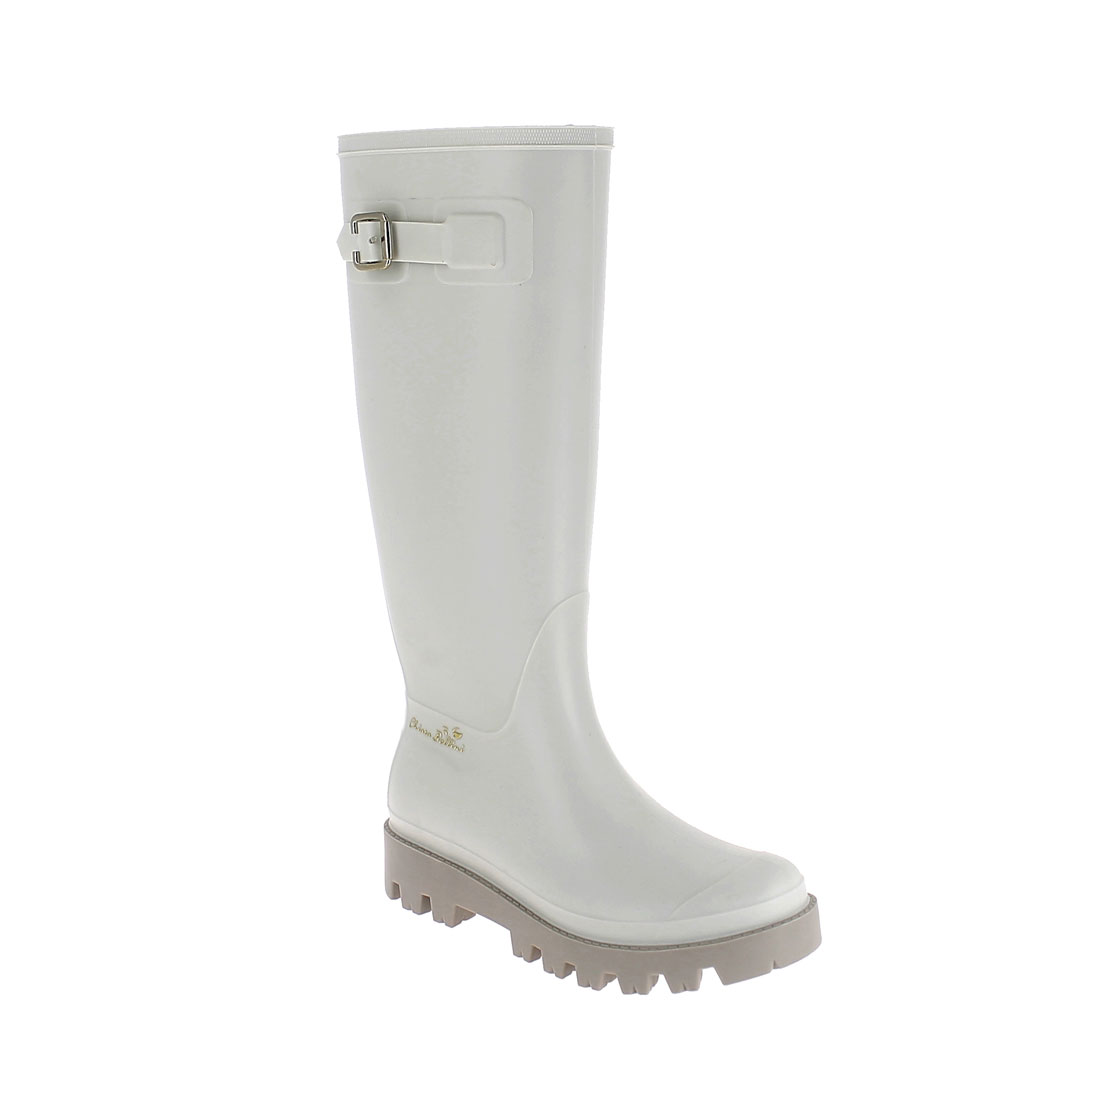 Wellington boot in trench pvc with metal buckle and 3D logo